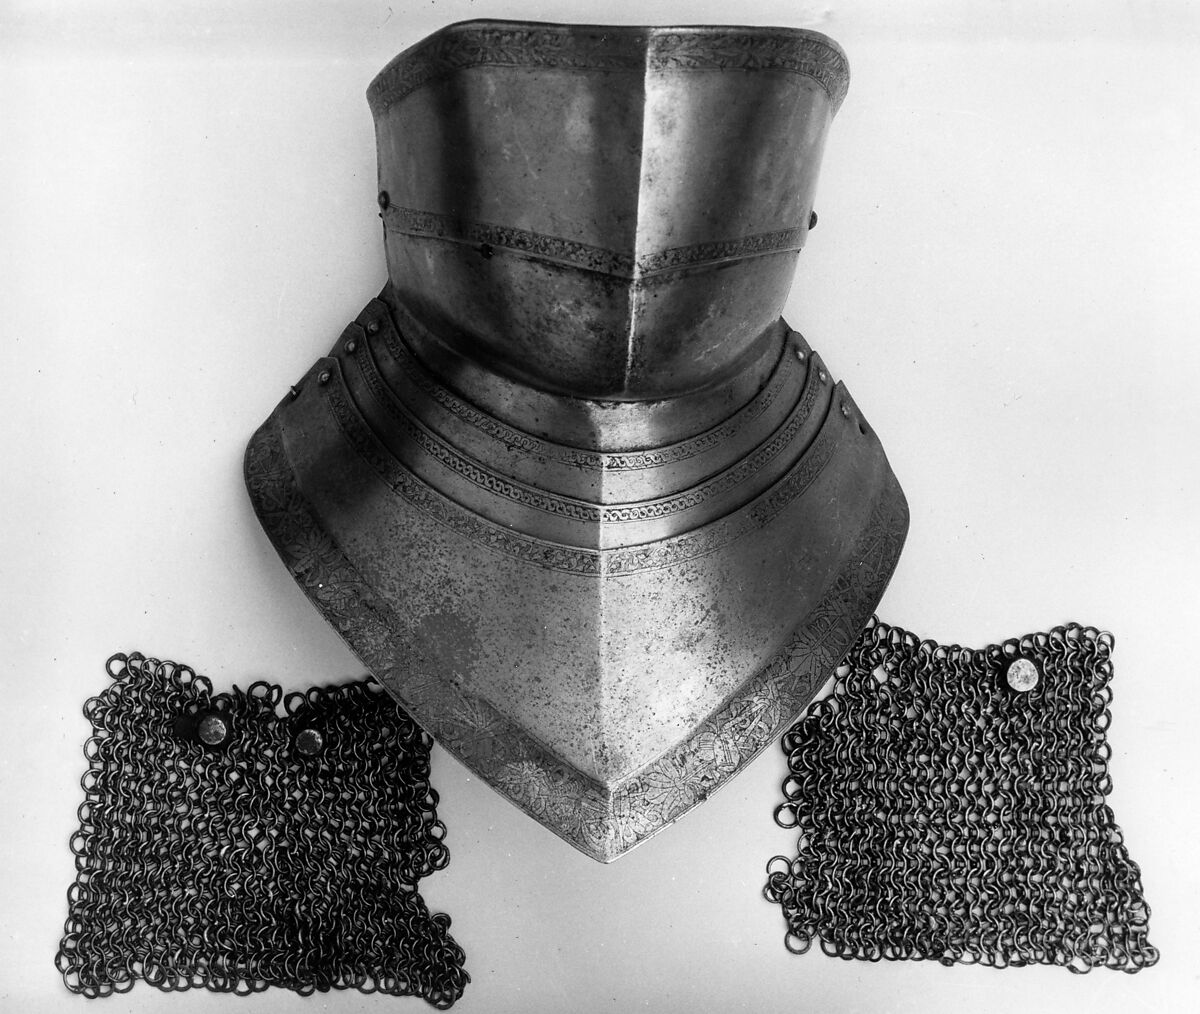 Composed Armor, Left elbow cop (h) marked by Guillem Margot (Flemish, active Brussels, recorded 1505–20), Steel, leather, Italian, probably Milan 